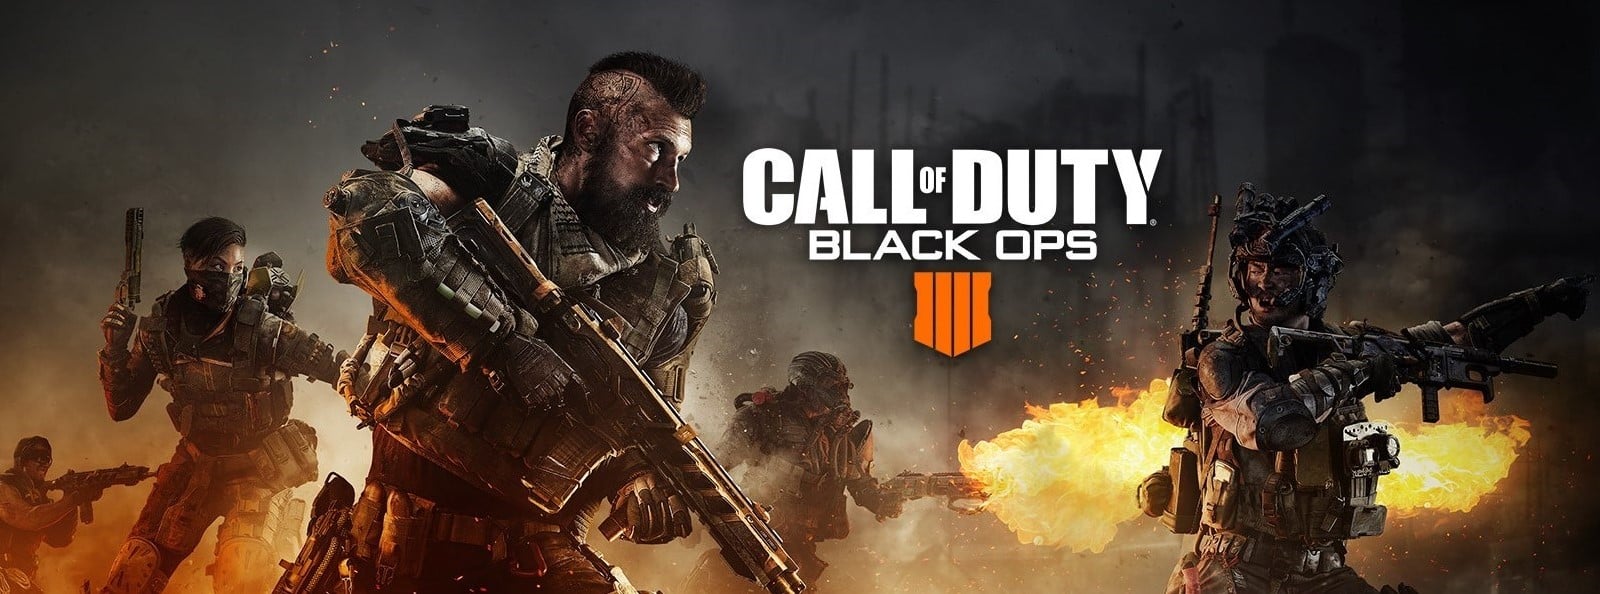 black ops free download xbox